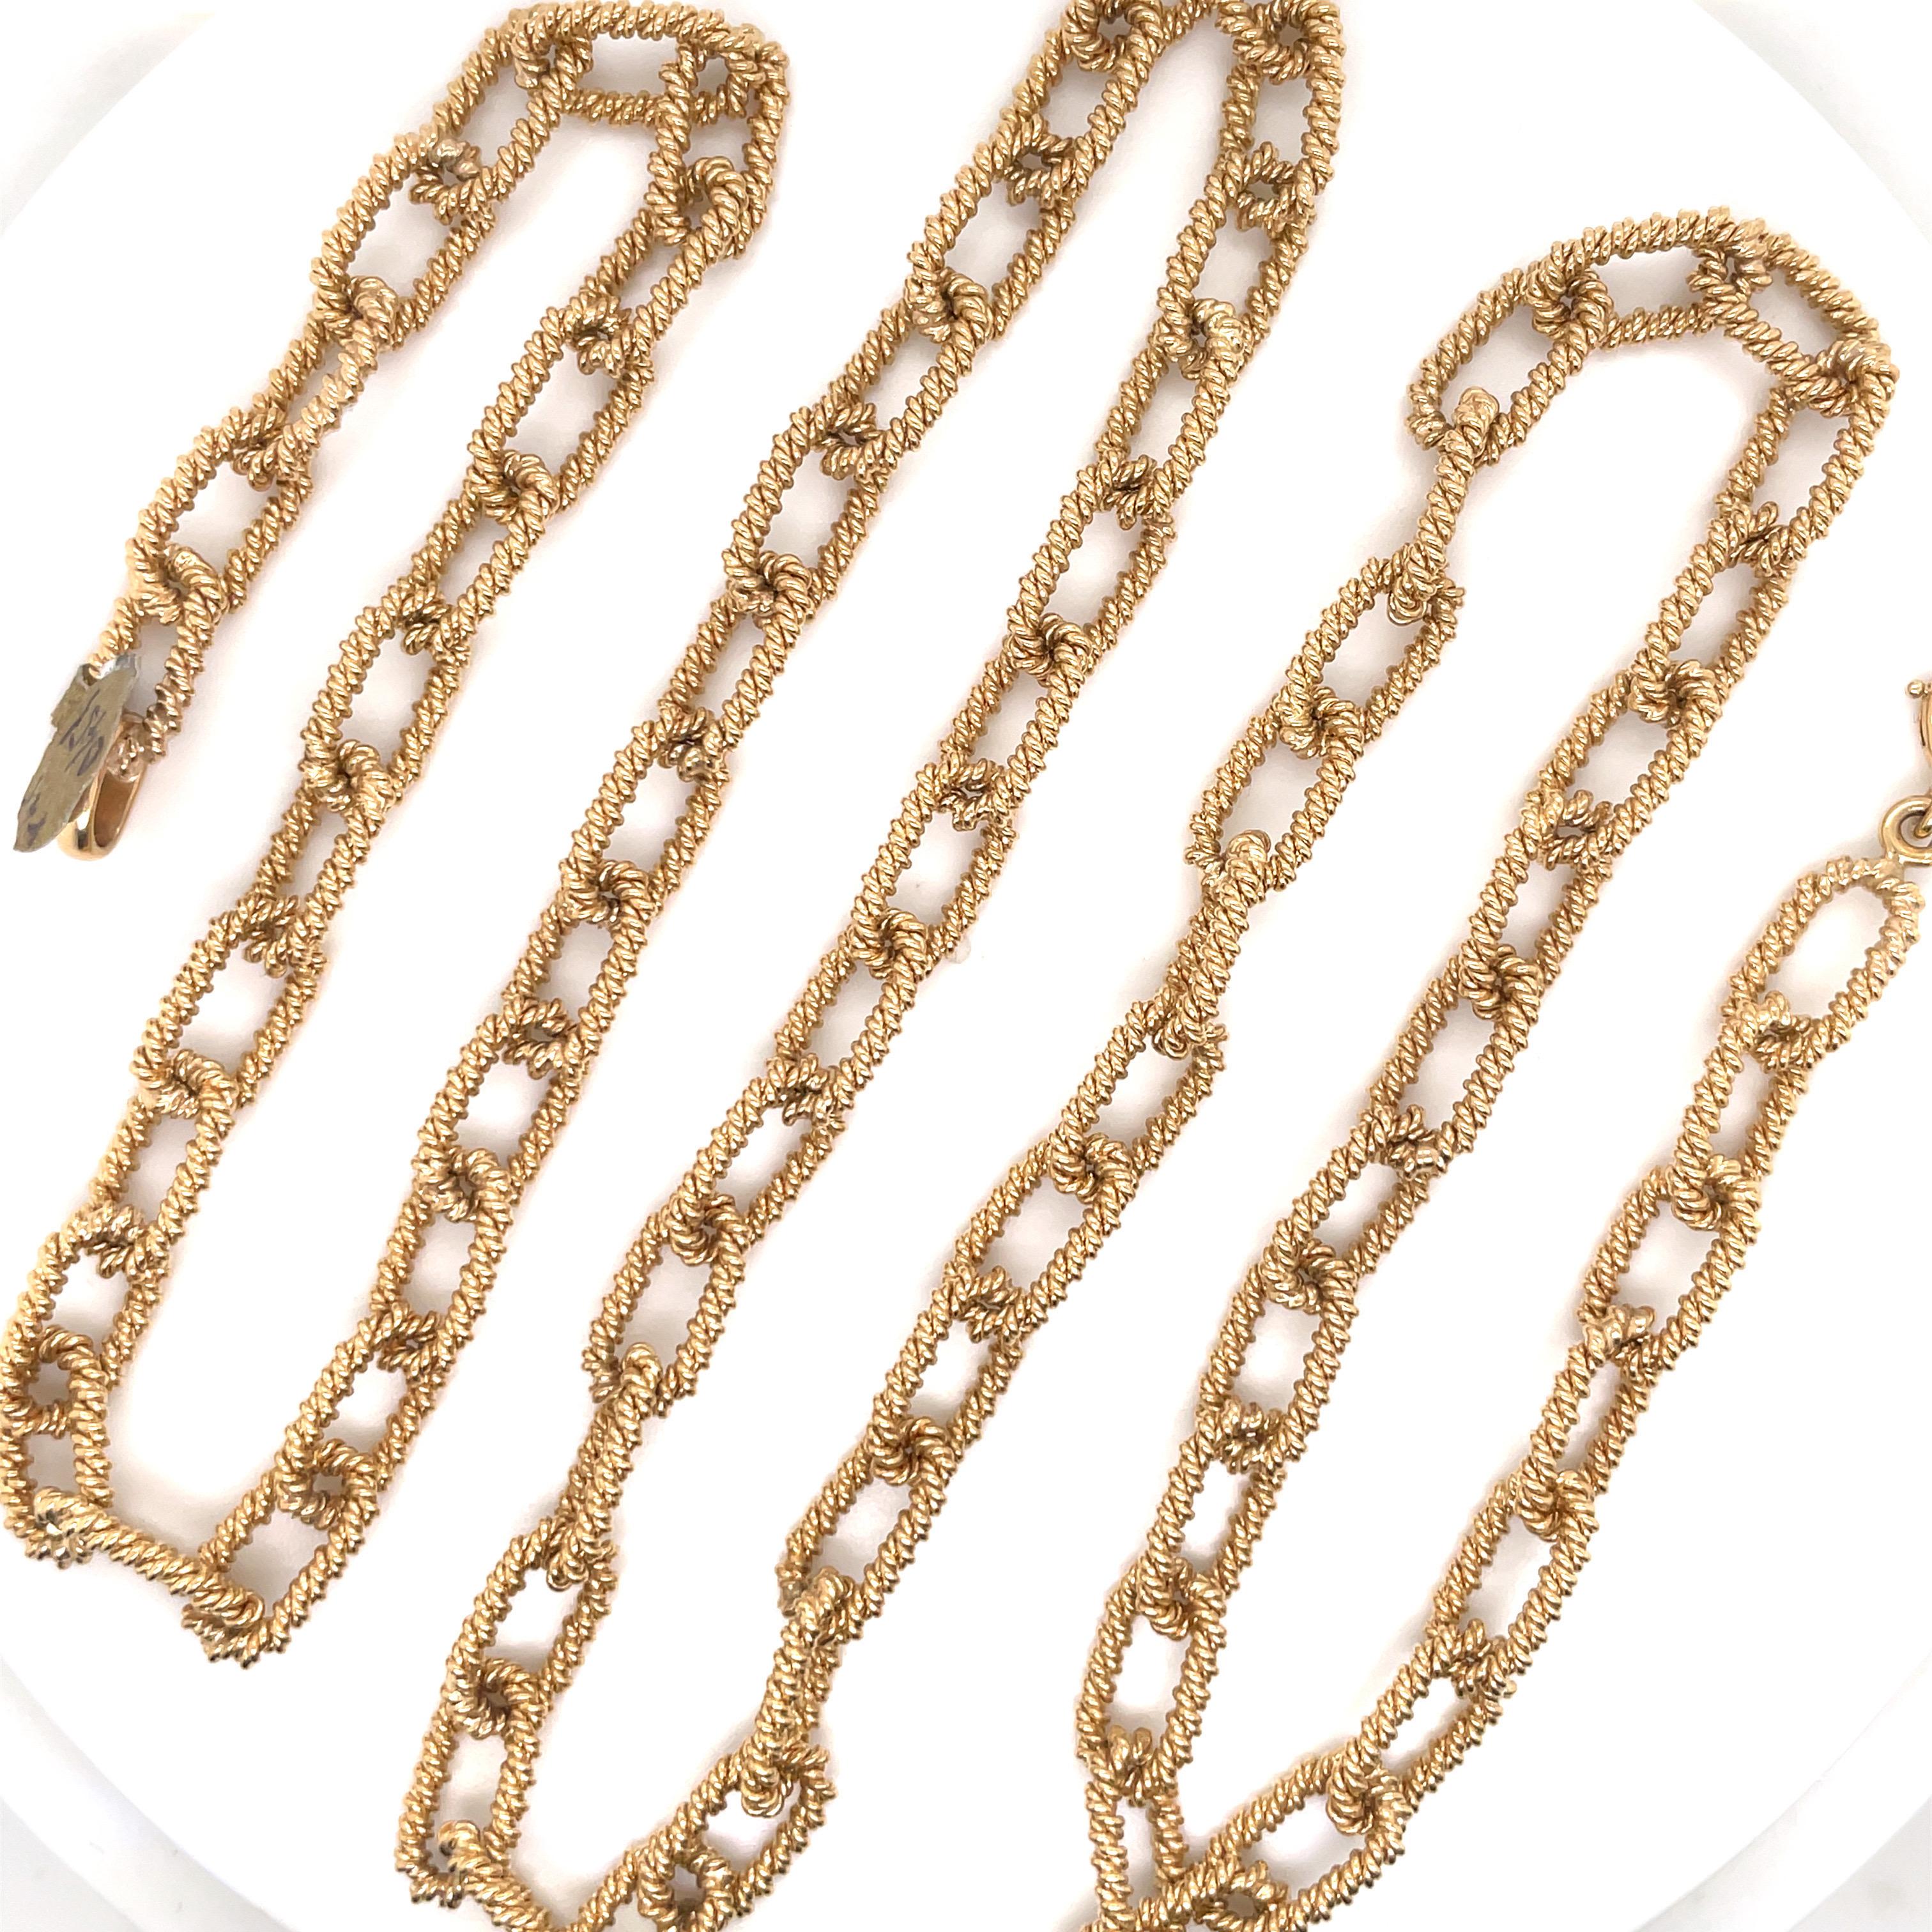 14 Karat Yellow Gold chain necklace featuring 75 oval links in a rope motif weighing 84.5 grams, 32.5 inches.
Link Measures:
0.59 Inches Long
0.32 Inches Wide